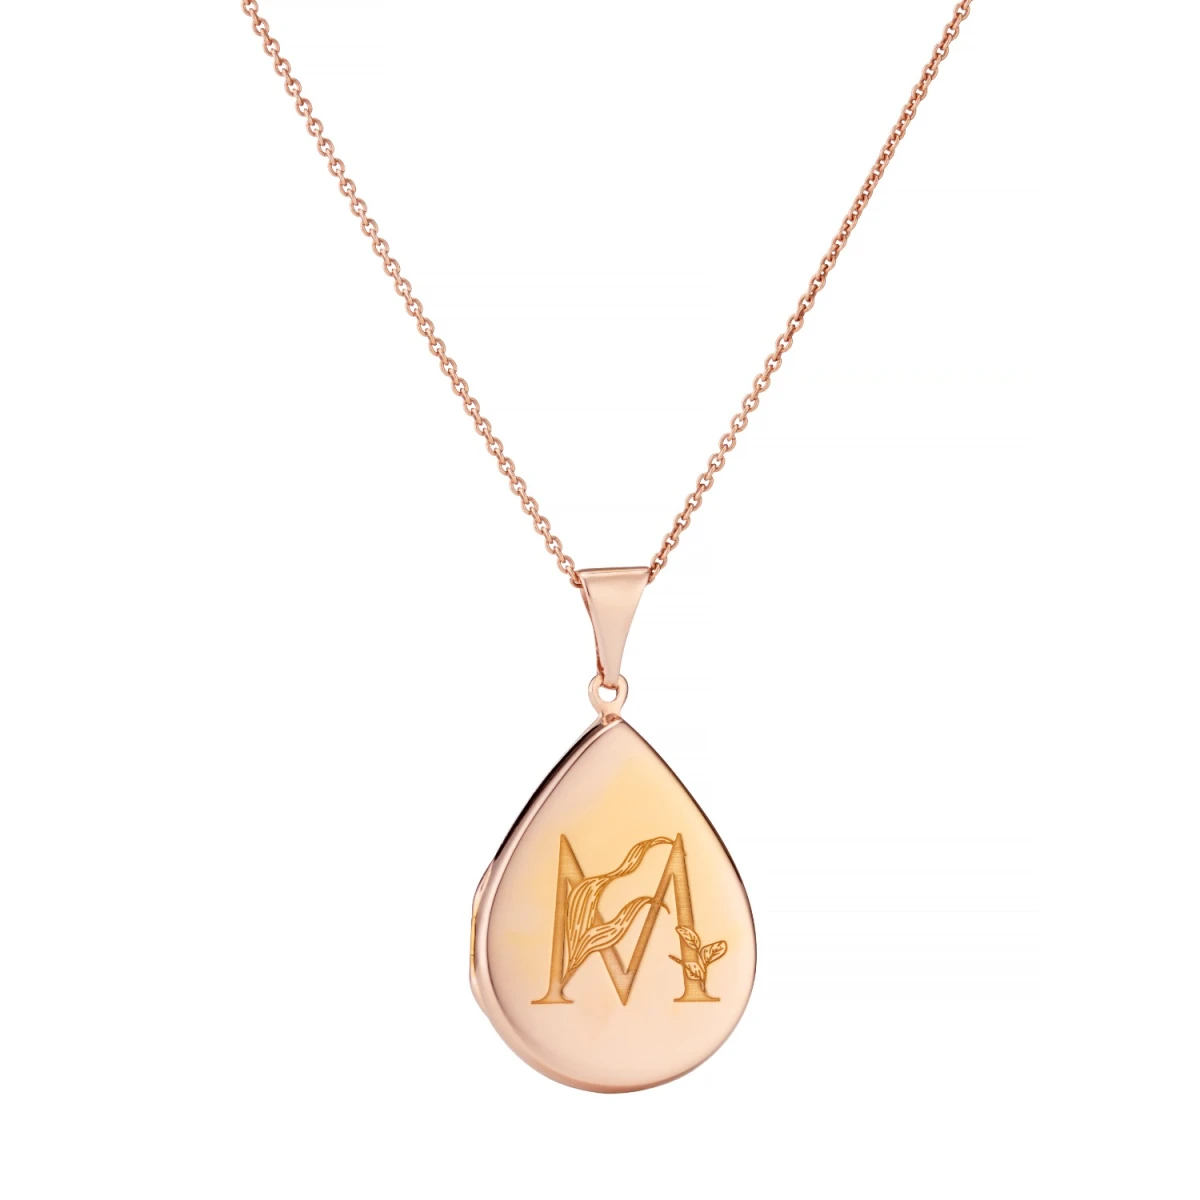 Posh Totty Designs Gold Plated Floral Engraved Initial Locket Necklace